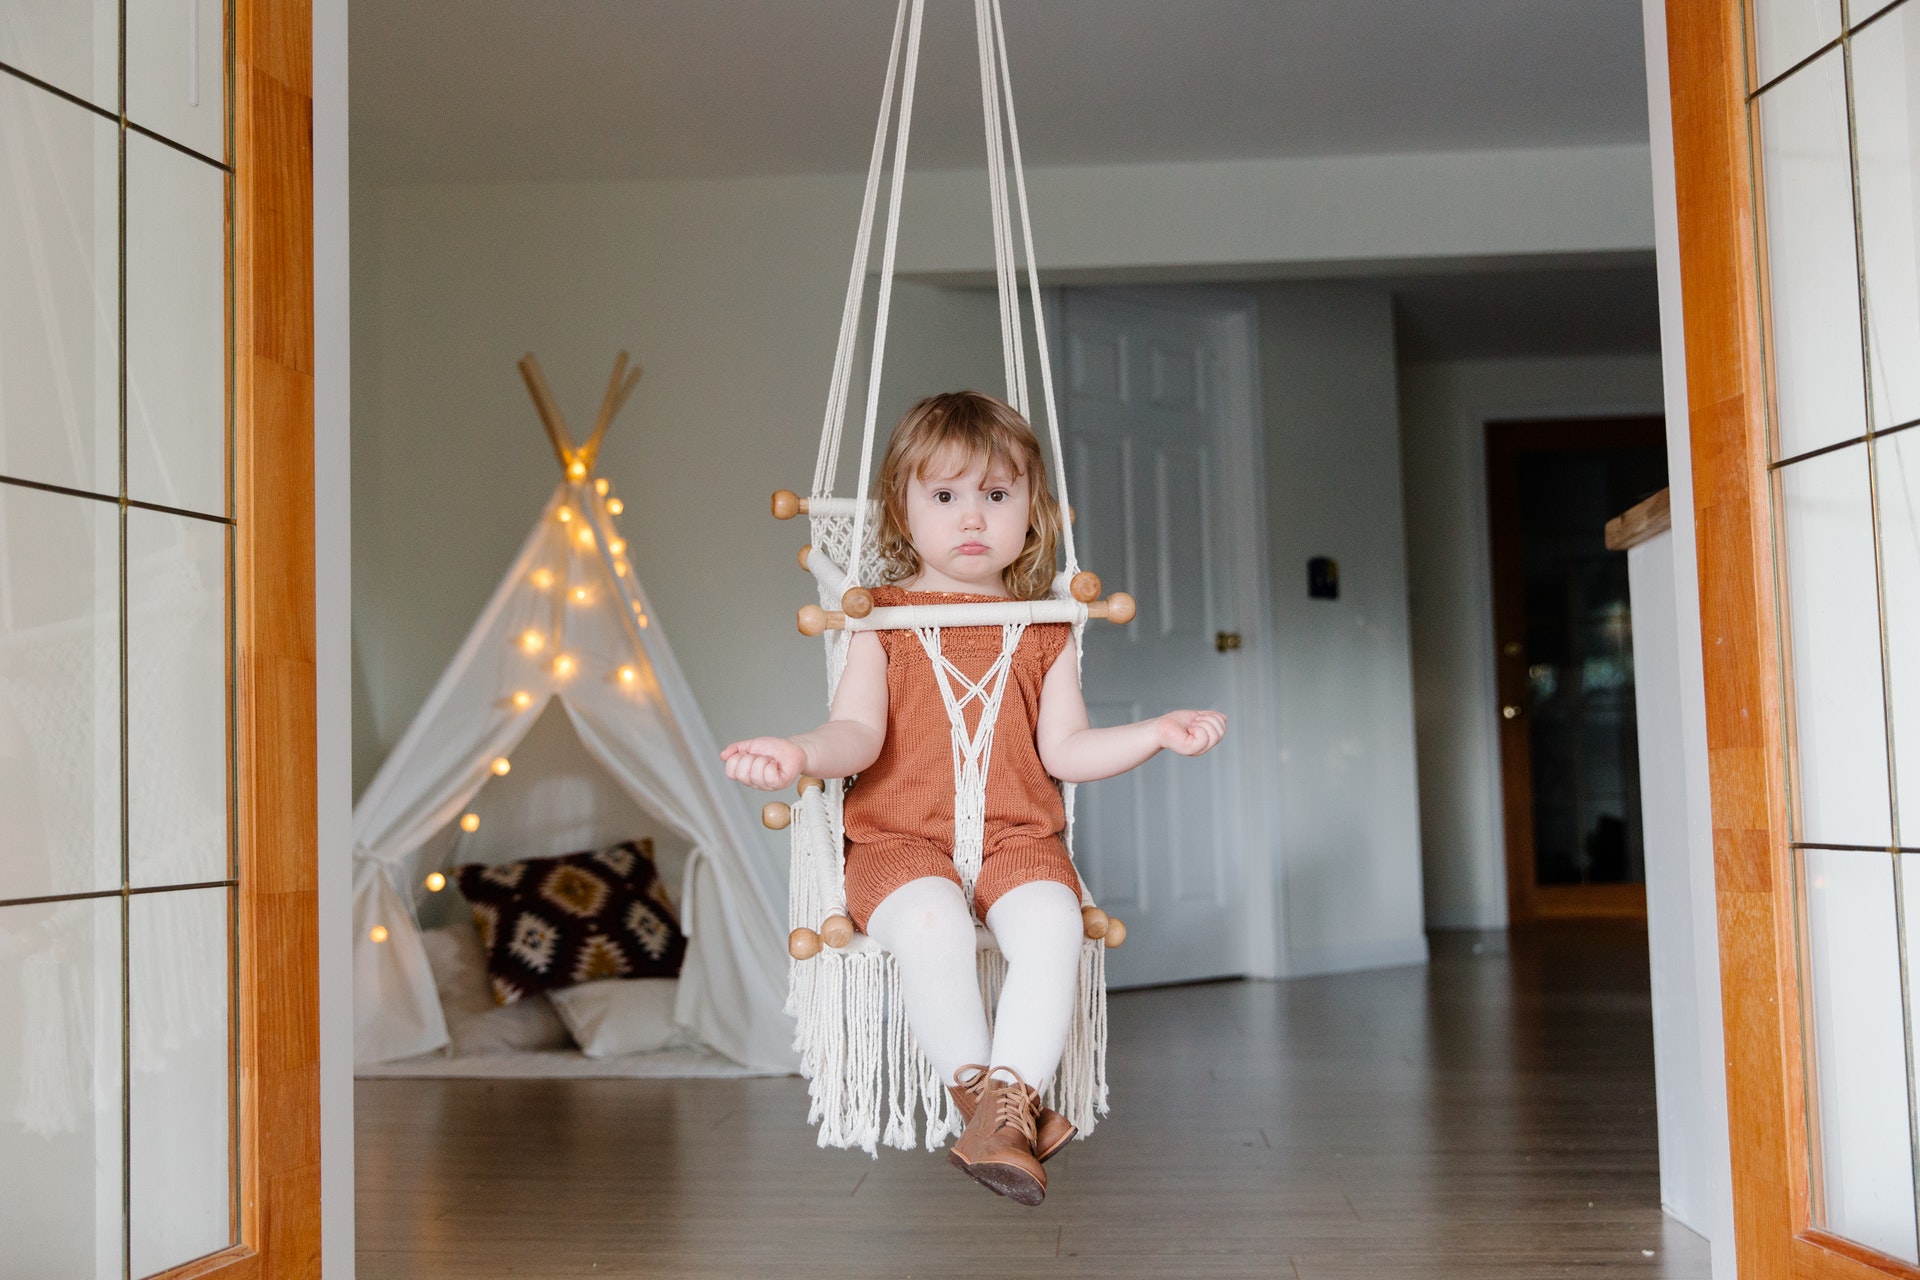 Right or wrong for you - small female child sitting in a rope swing in a doorway shrugging with a tent and fairy lights behind her